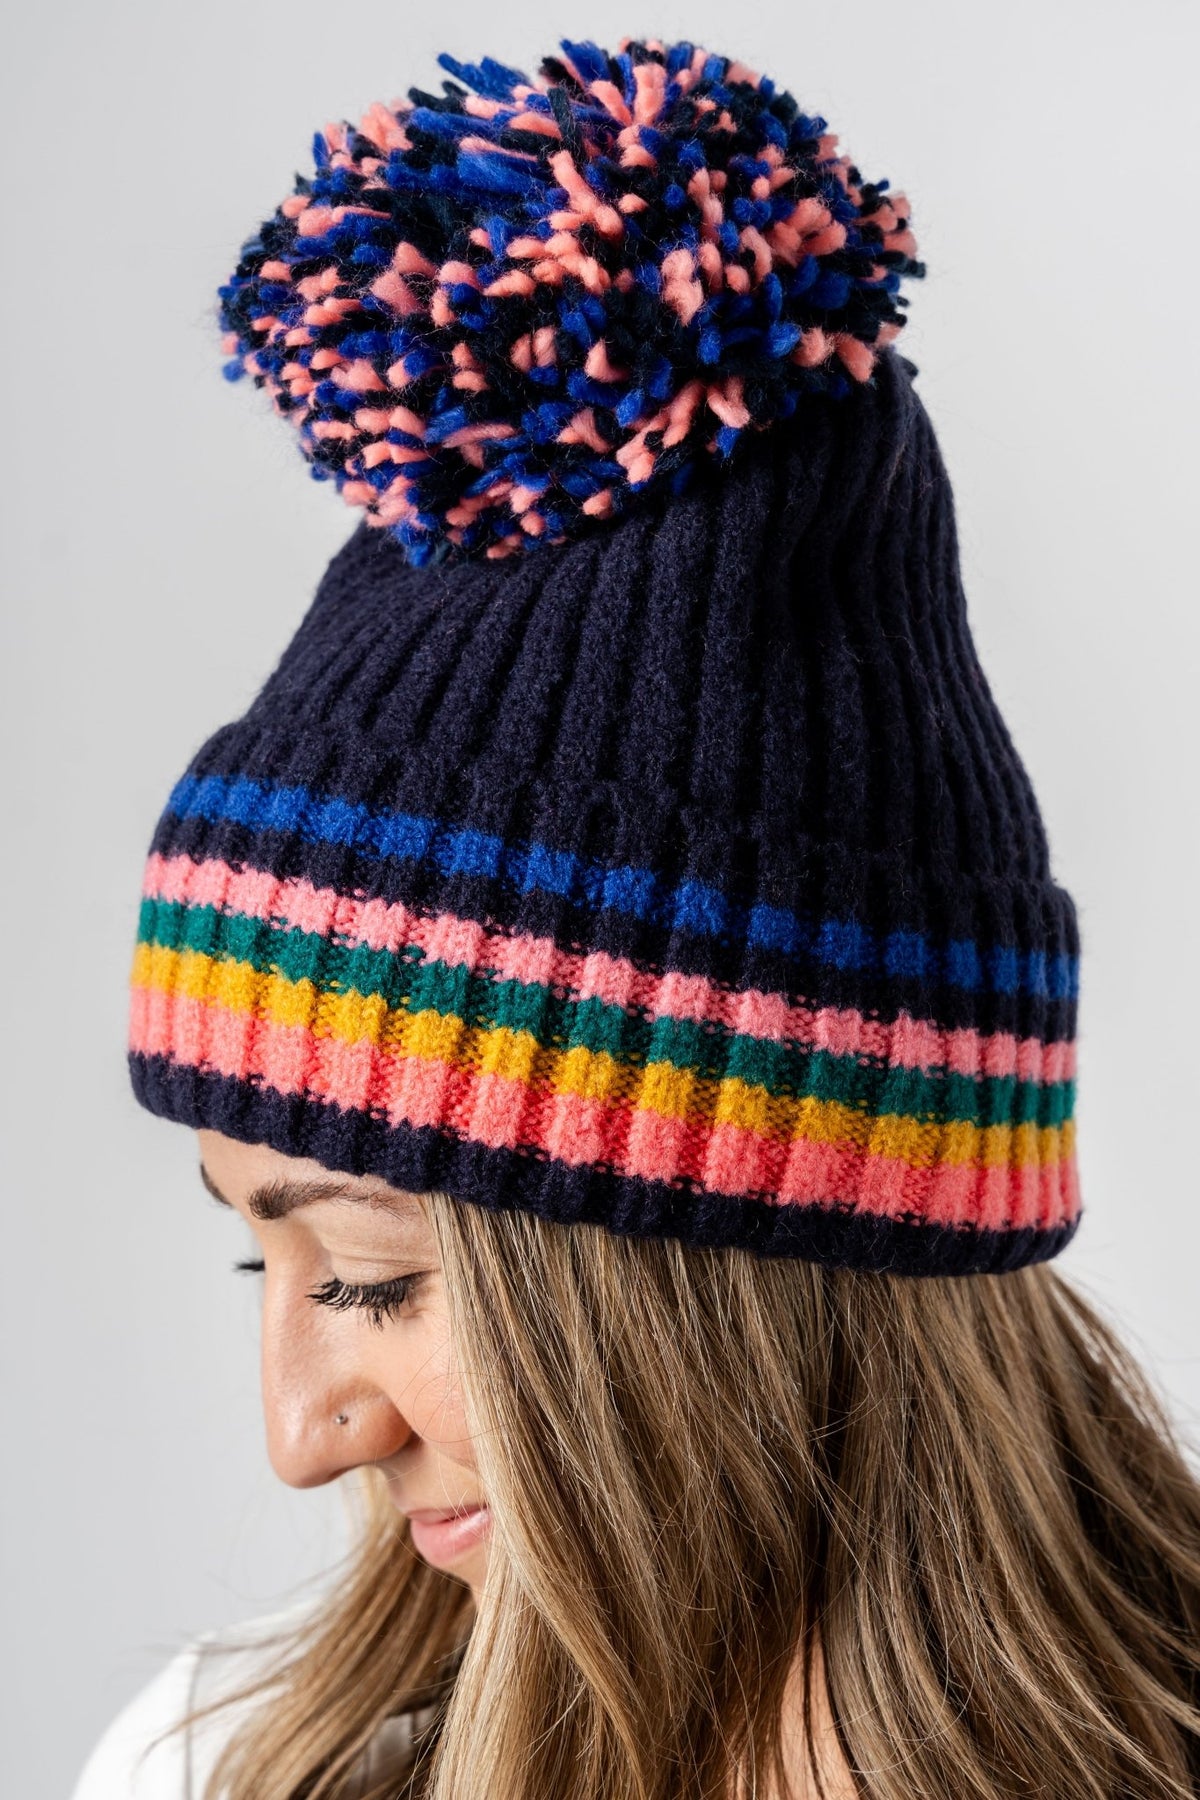 Ronen multi knit pom beanie navy - Trendy Gifts at Lush Fashion Lounge Boutique in Oklahoma City